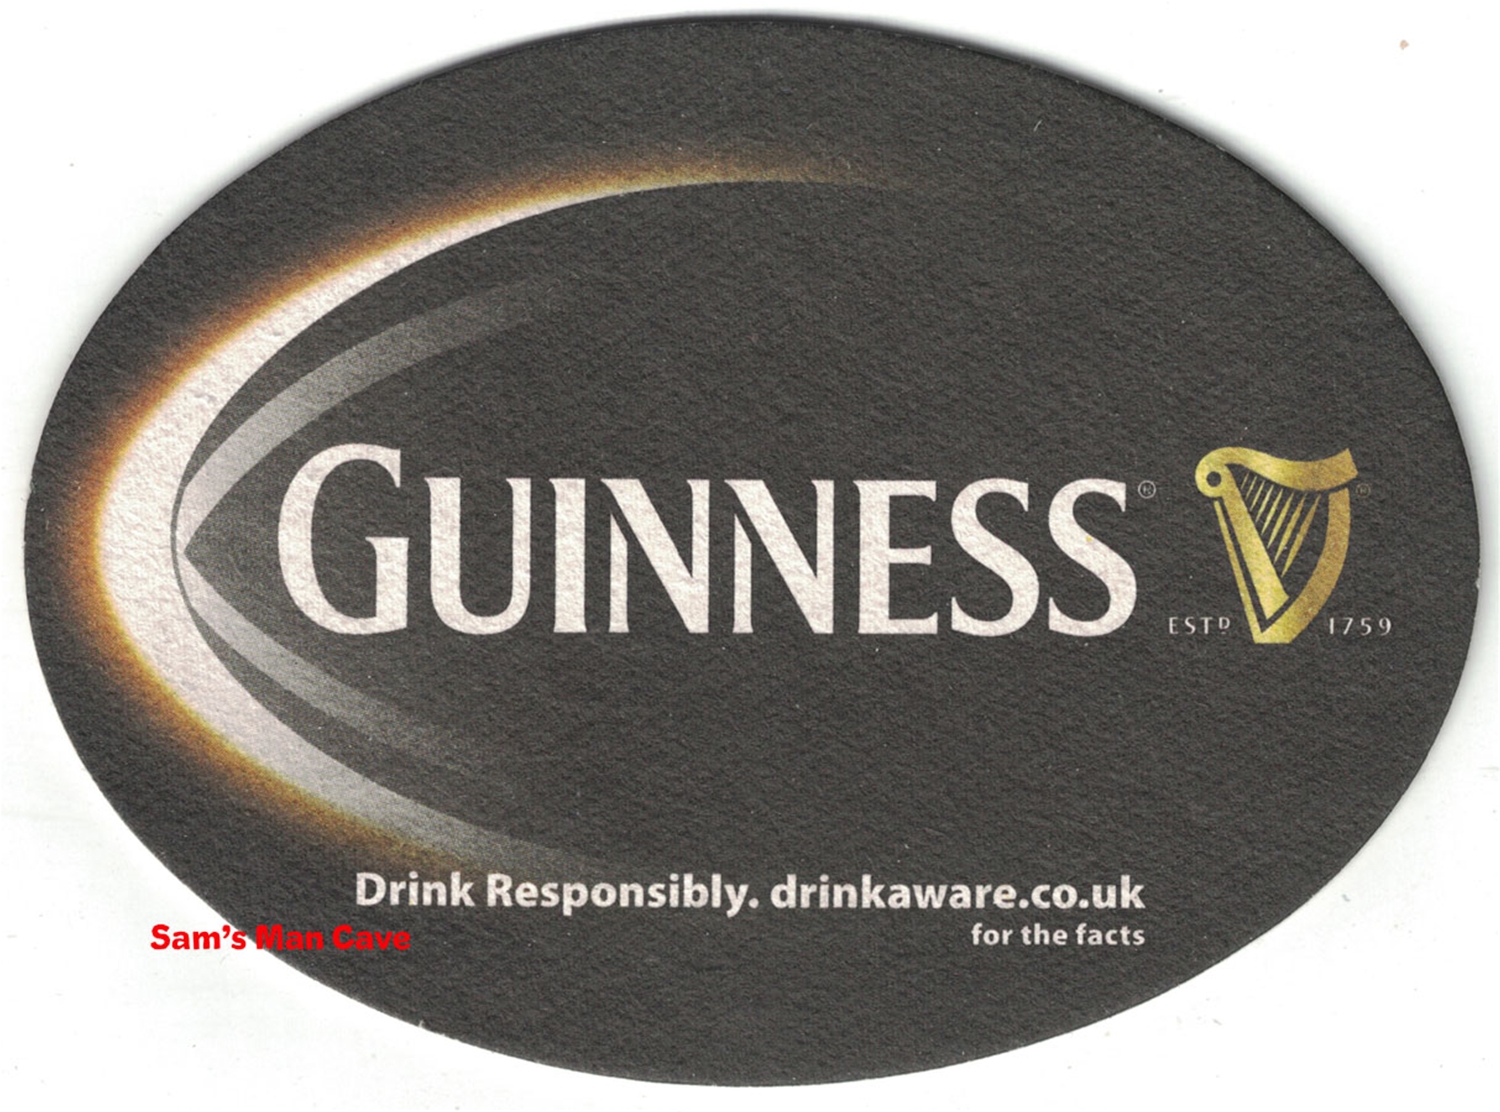 Guinness Rugby Beer Coaster